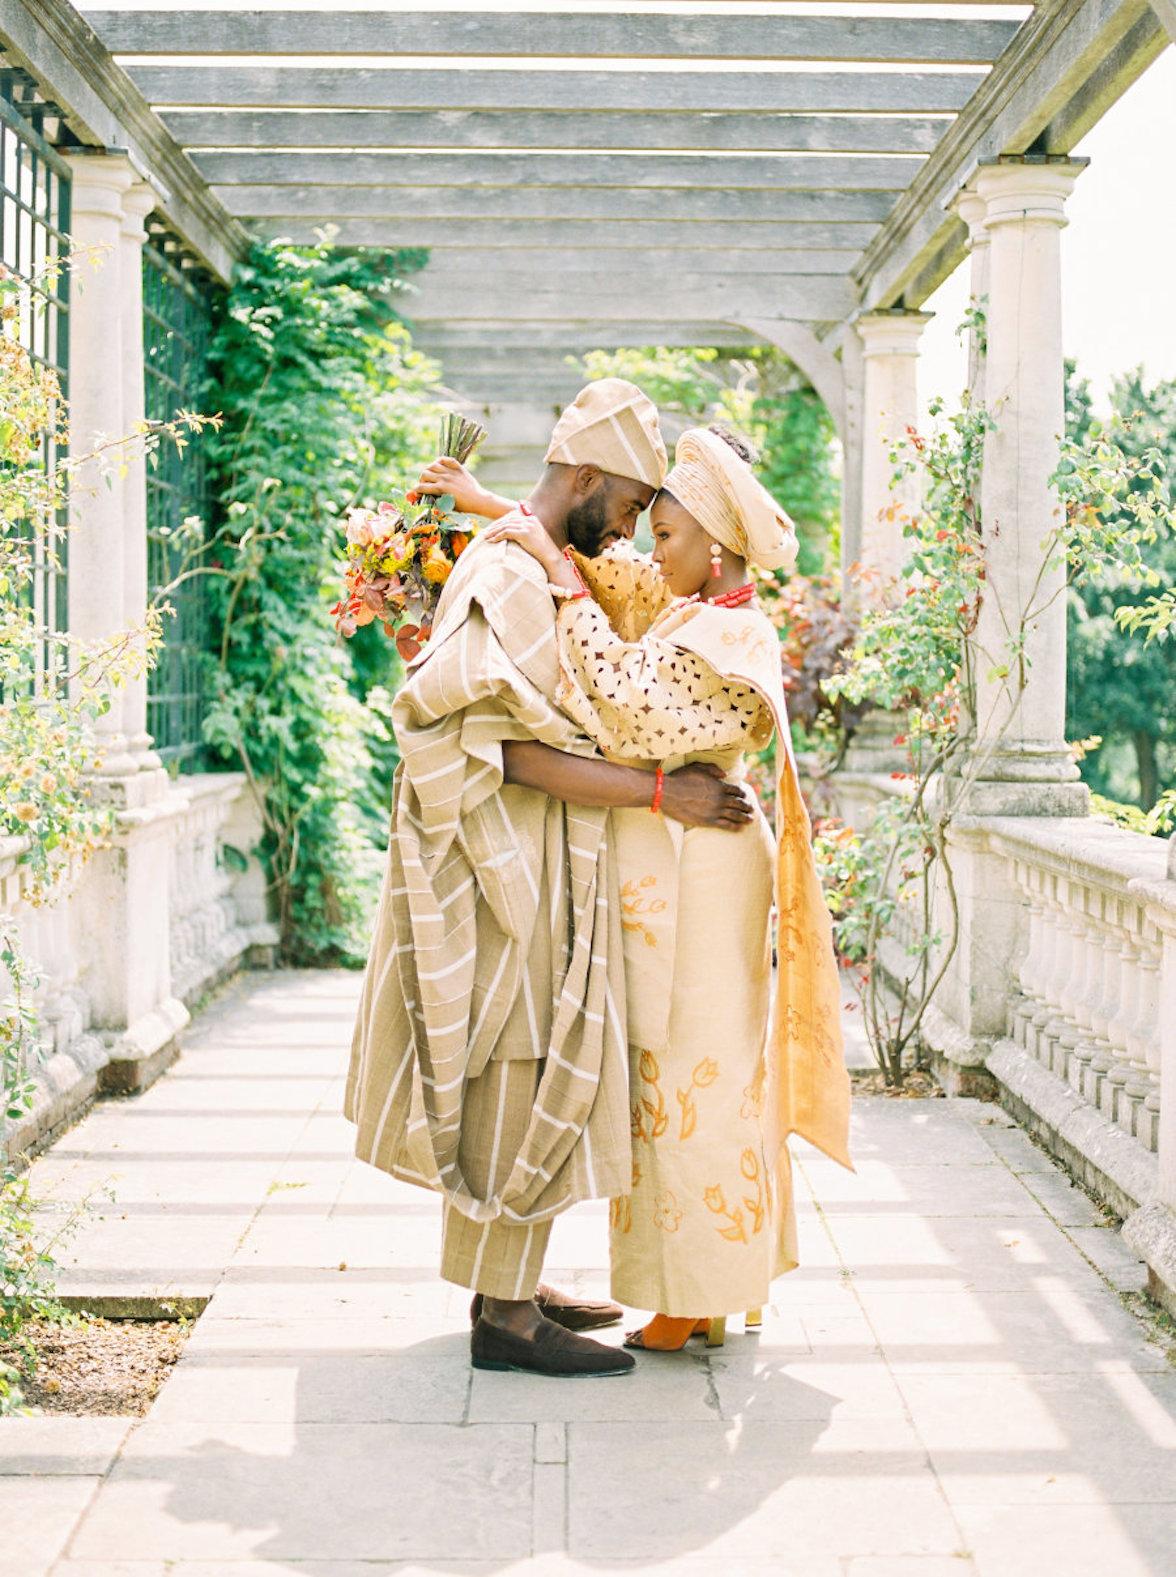 13 Beautiful Wedding Traditions From Around the World